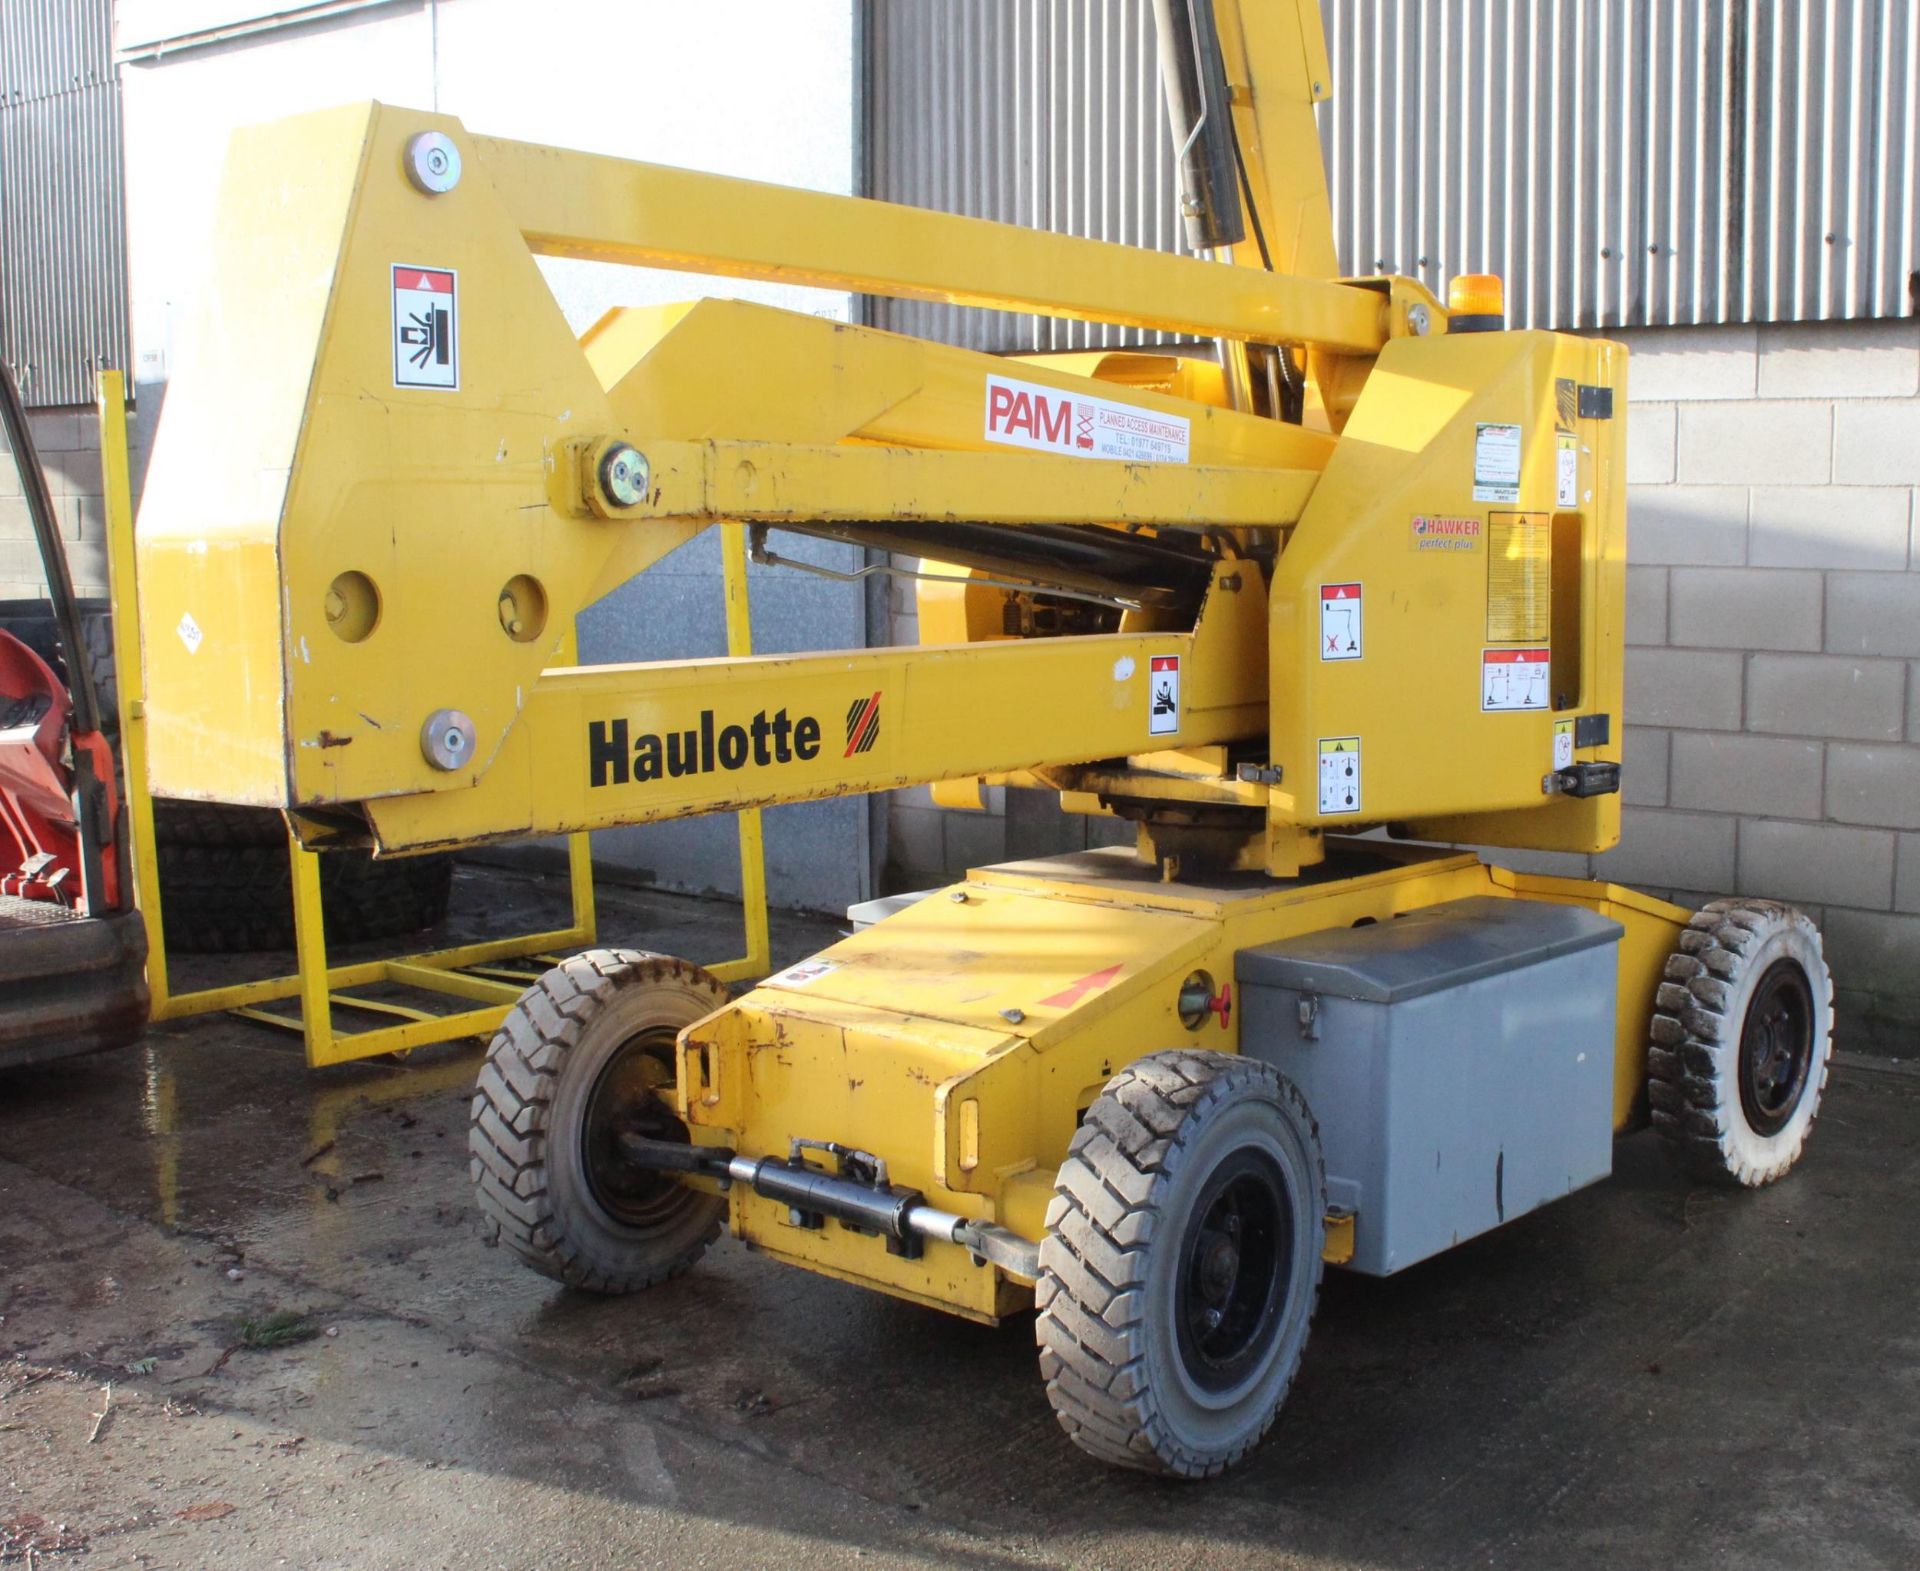 INDOOR HAULETTE HAISI 48V HA15 CHERRY PICKER APPROX 2000 HOURS BUILT IN 110/240V CHARGER 15 METRE - Image 6 of 10